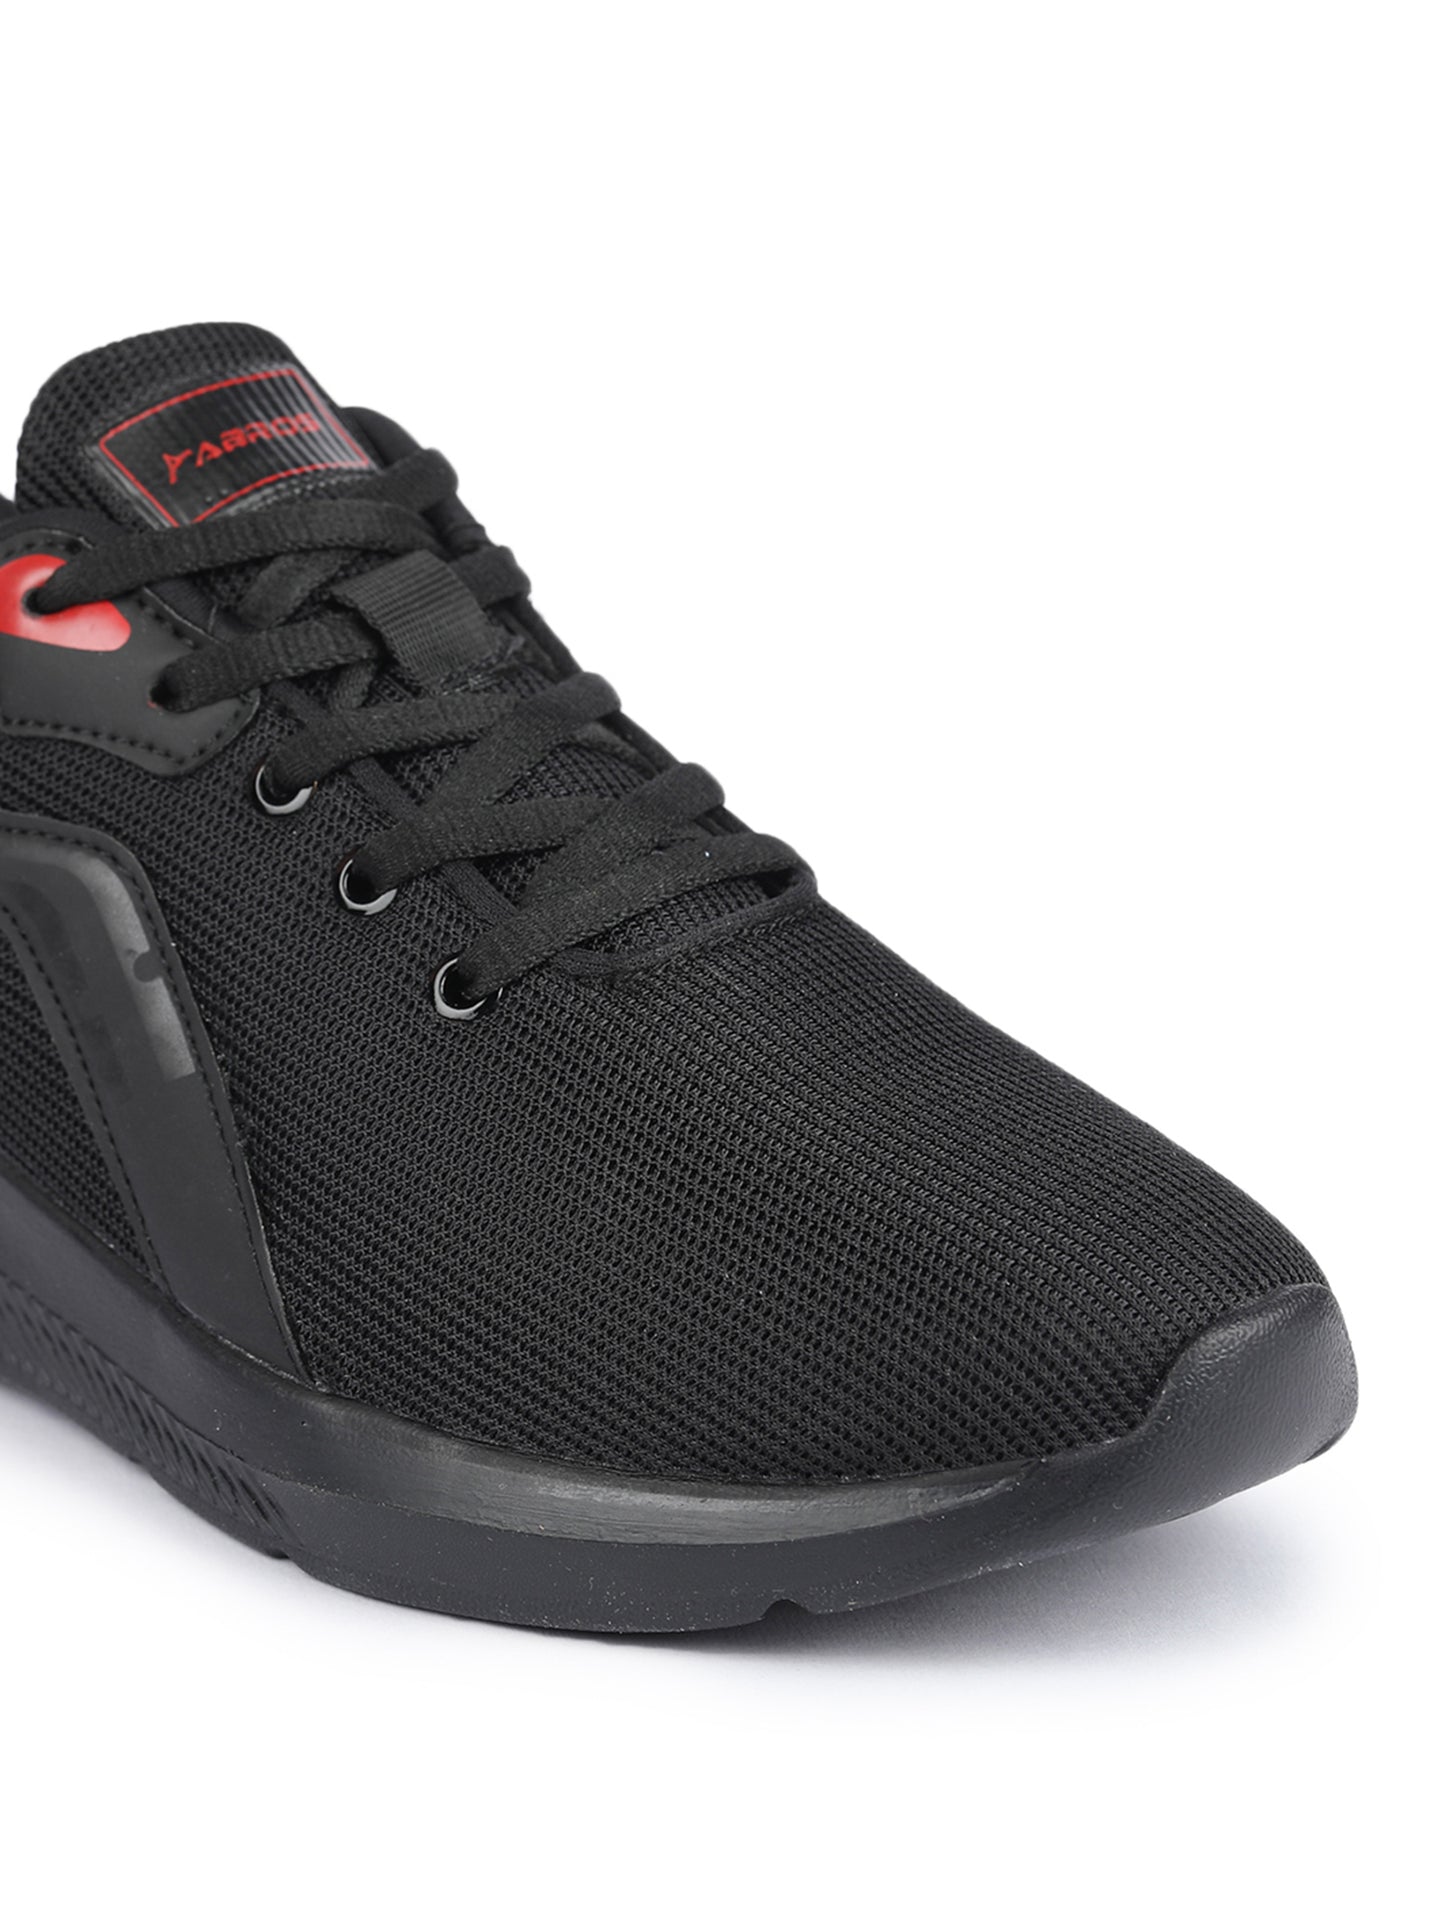 ABROS Nile Sports Shoes For Men